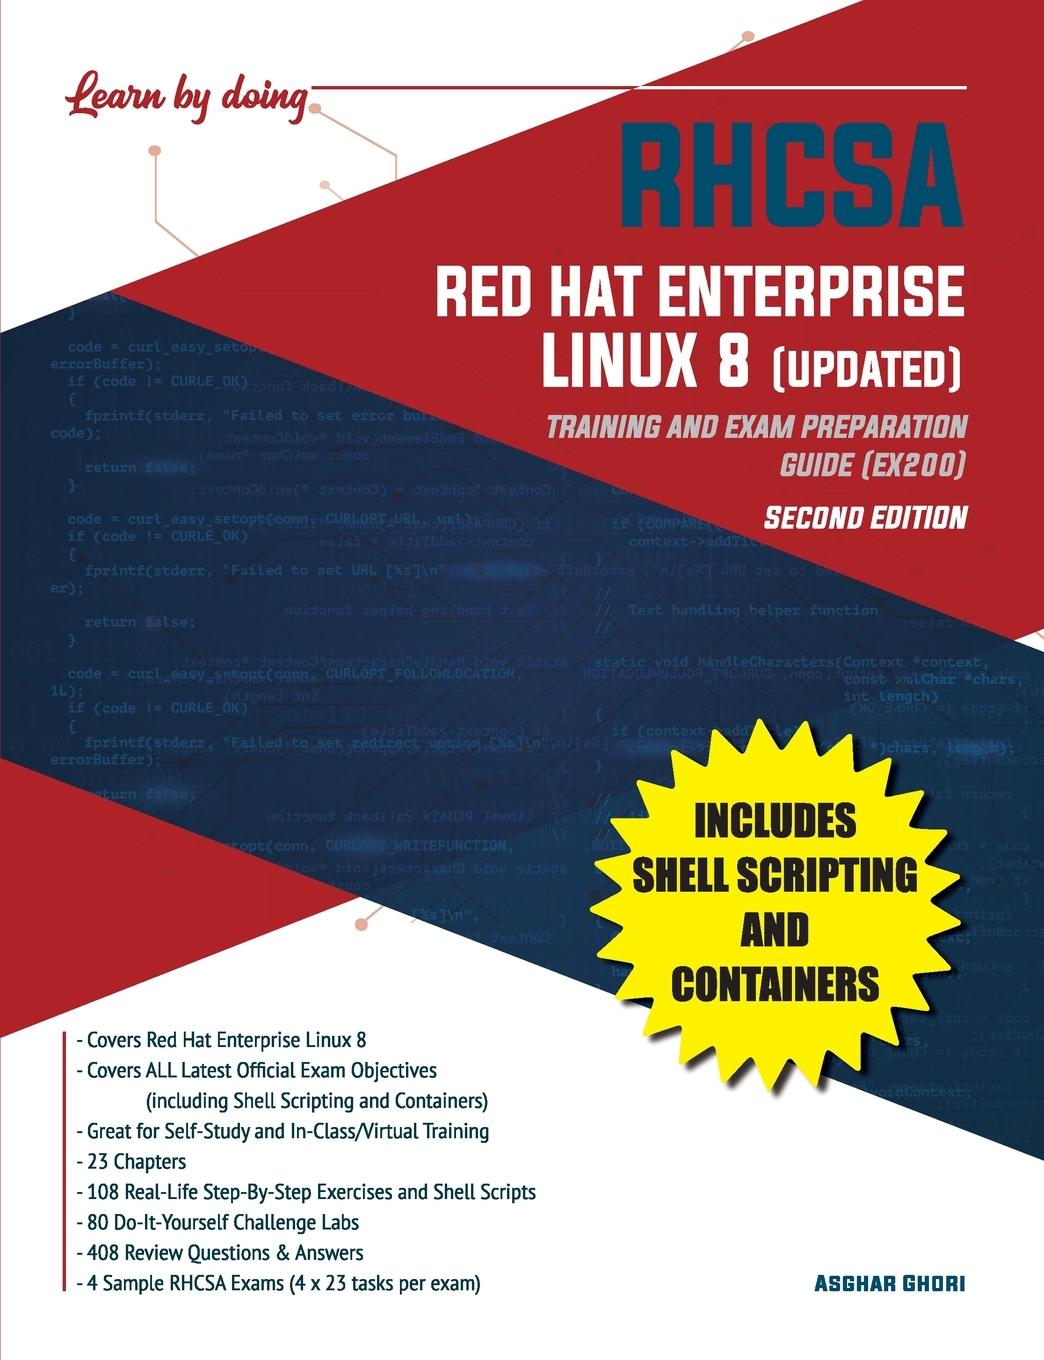 Book RHCSA Red Hat Enterprise Linux 8 (UPDATED) 